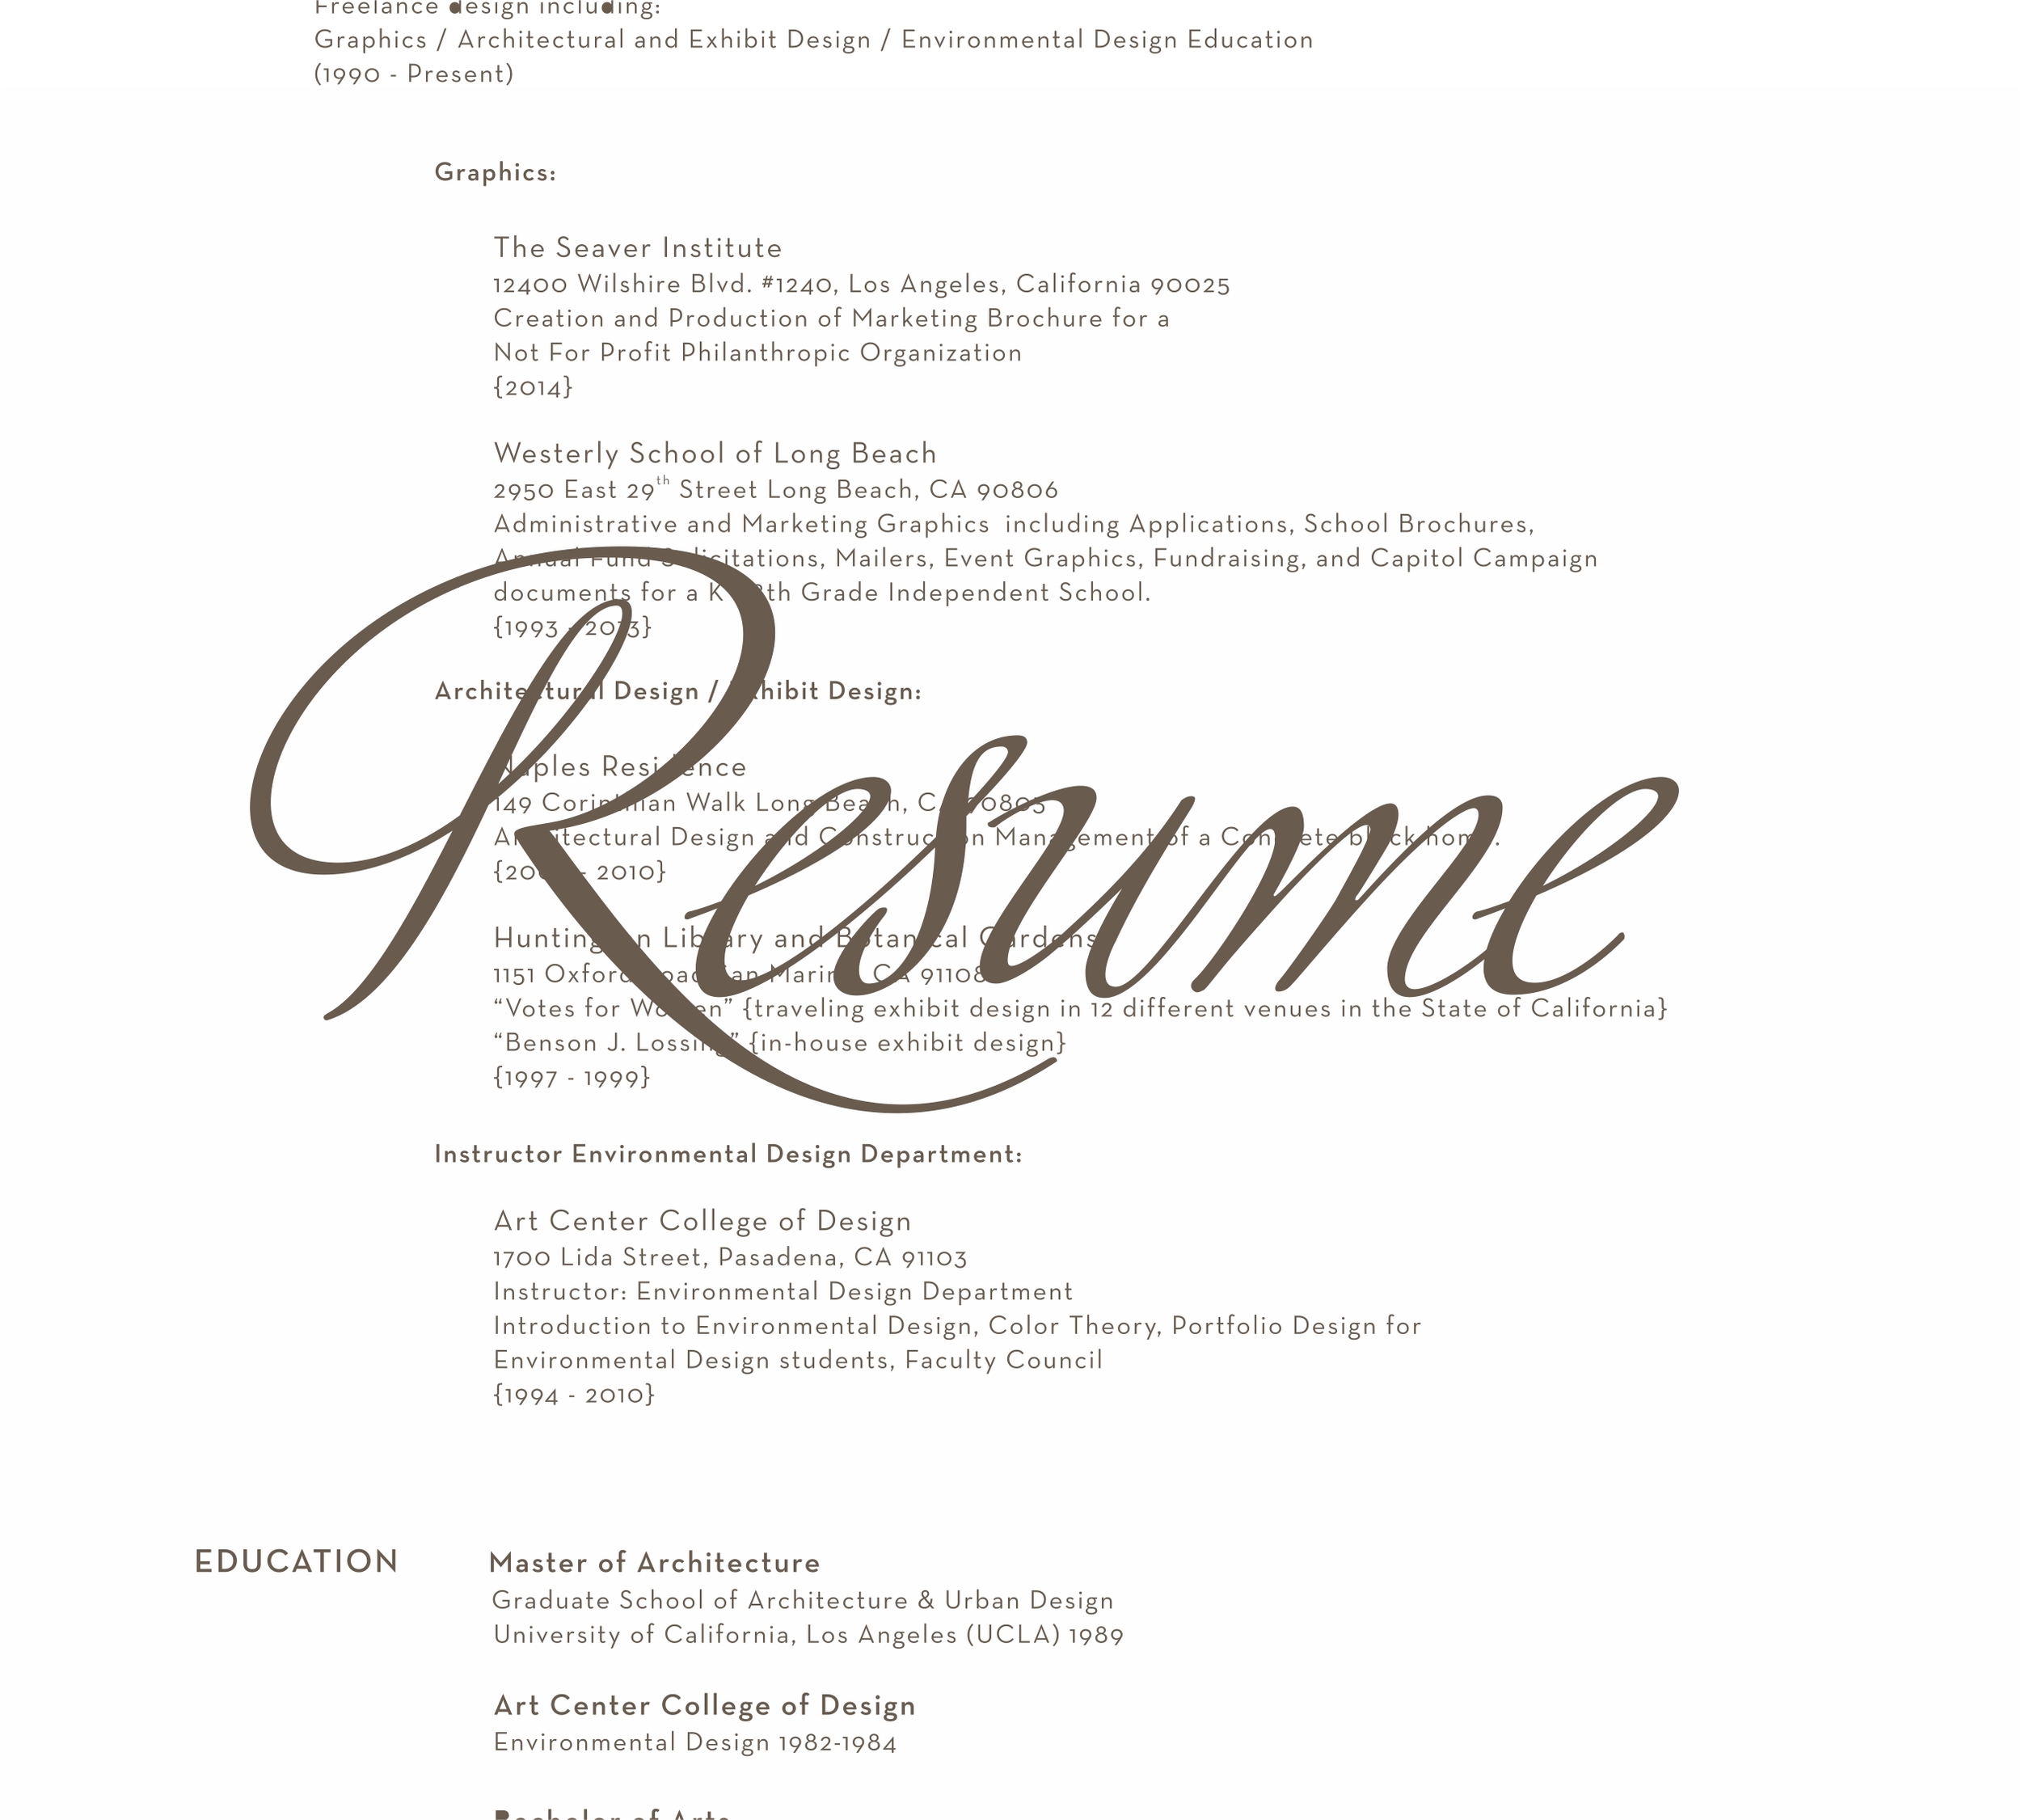 About Resume Footer.jpg